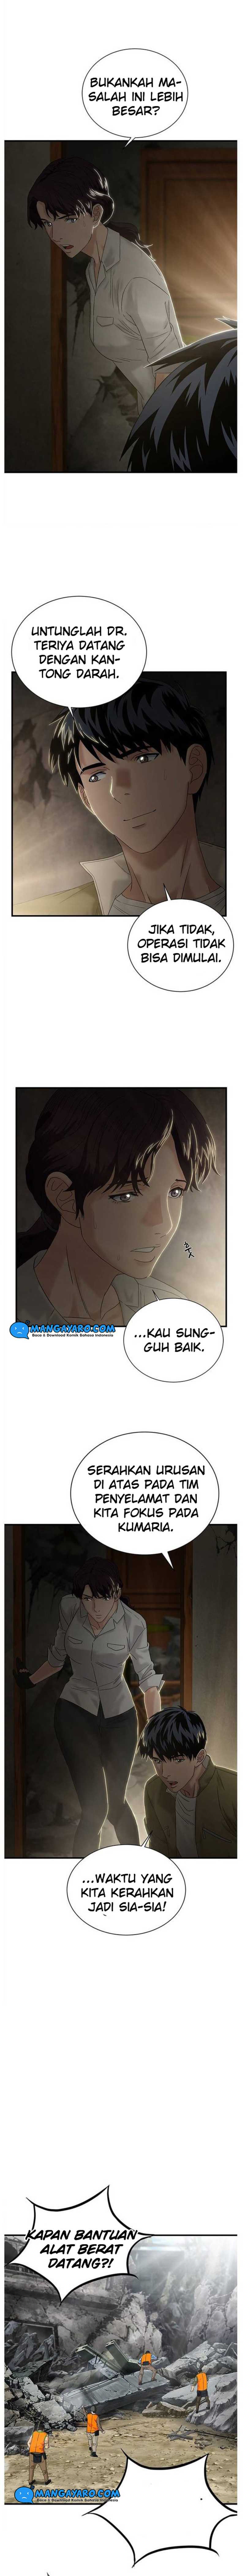 Dr. Choi Tae-soo Chapter 53